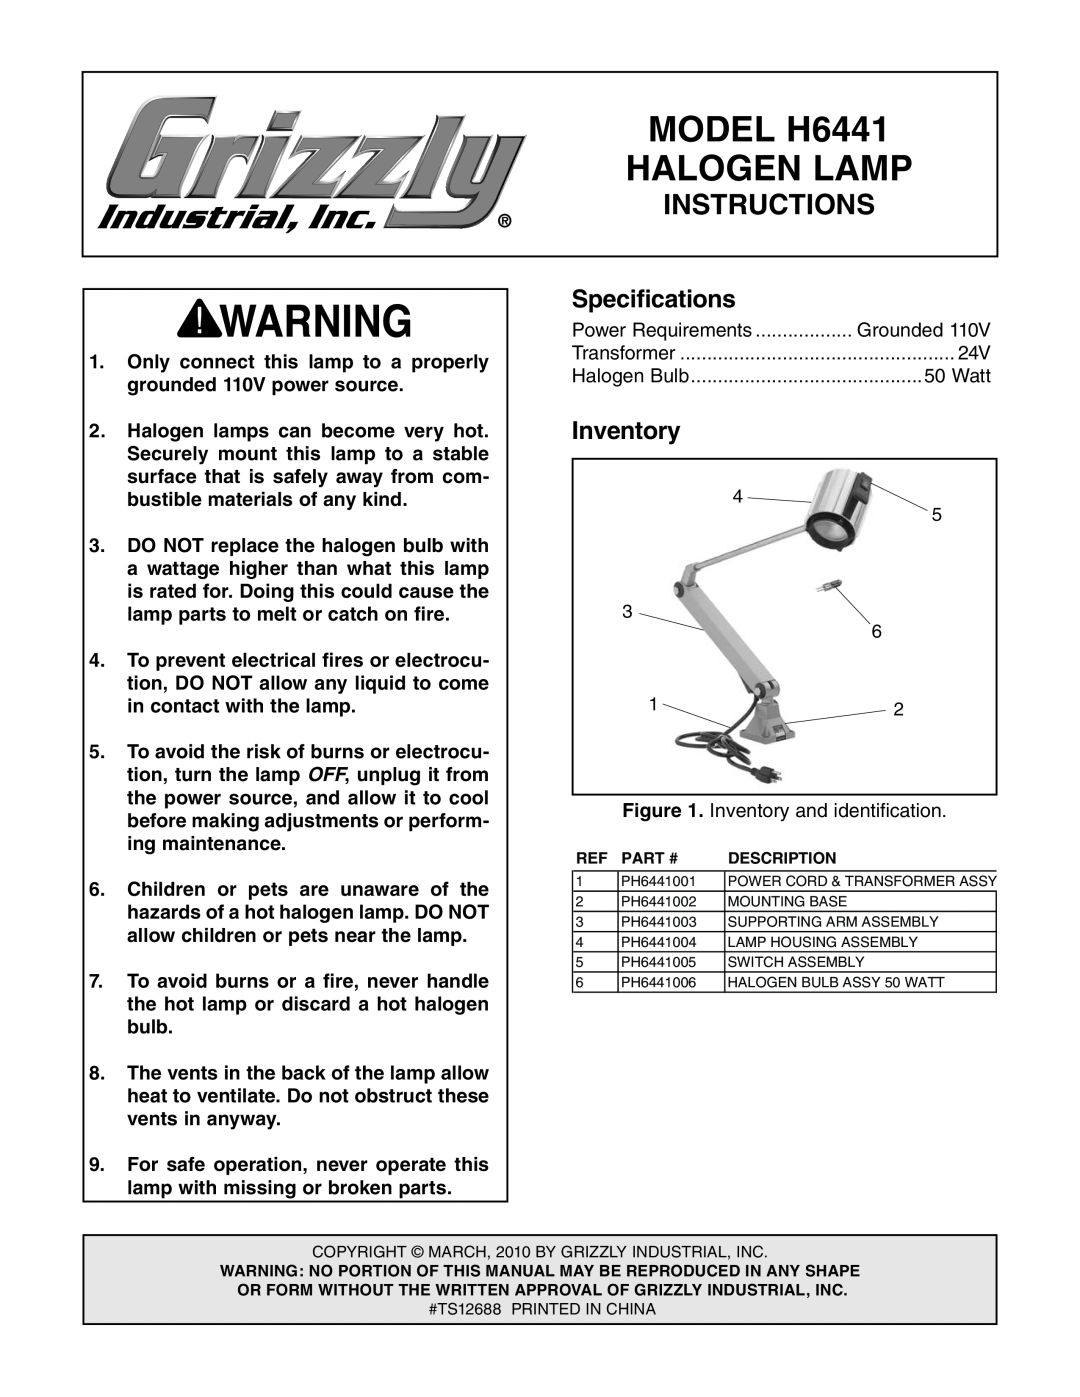 Grizzly specifications Specifications, Inventory, MODEL H6441, Halogen Lamp, Instructions 